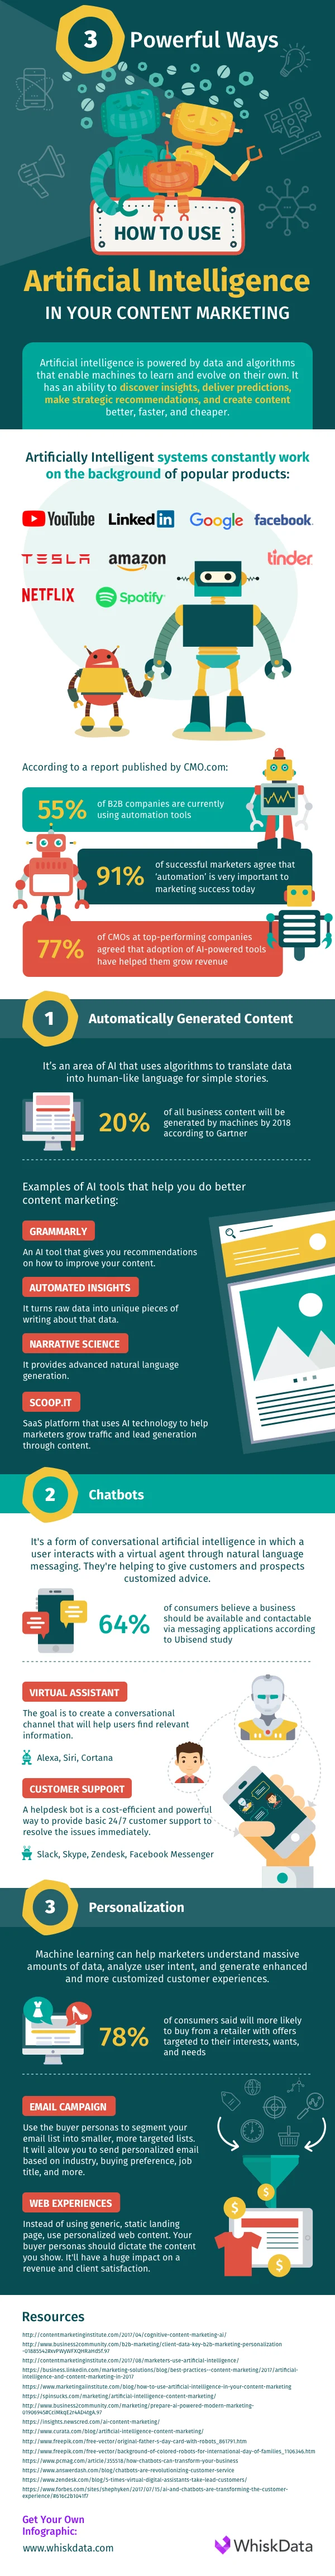 3 Powerful Ways - How to Use Artificial Intelligence in Your #ContentMarketing - #Infographic